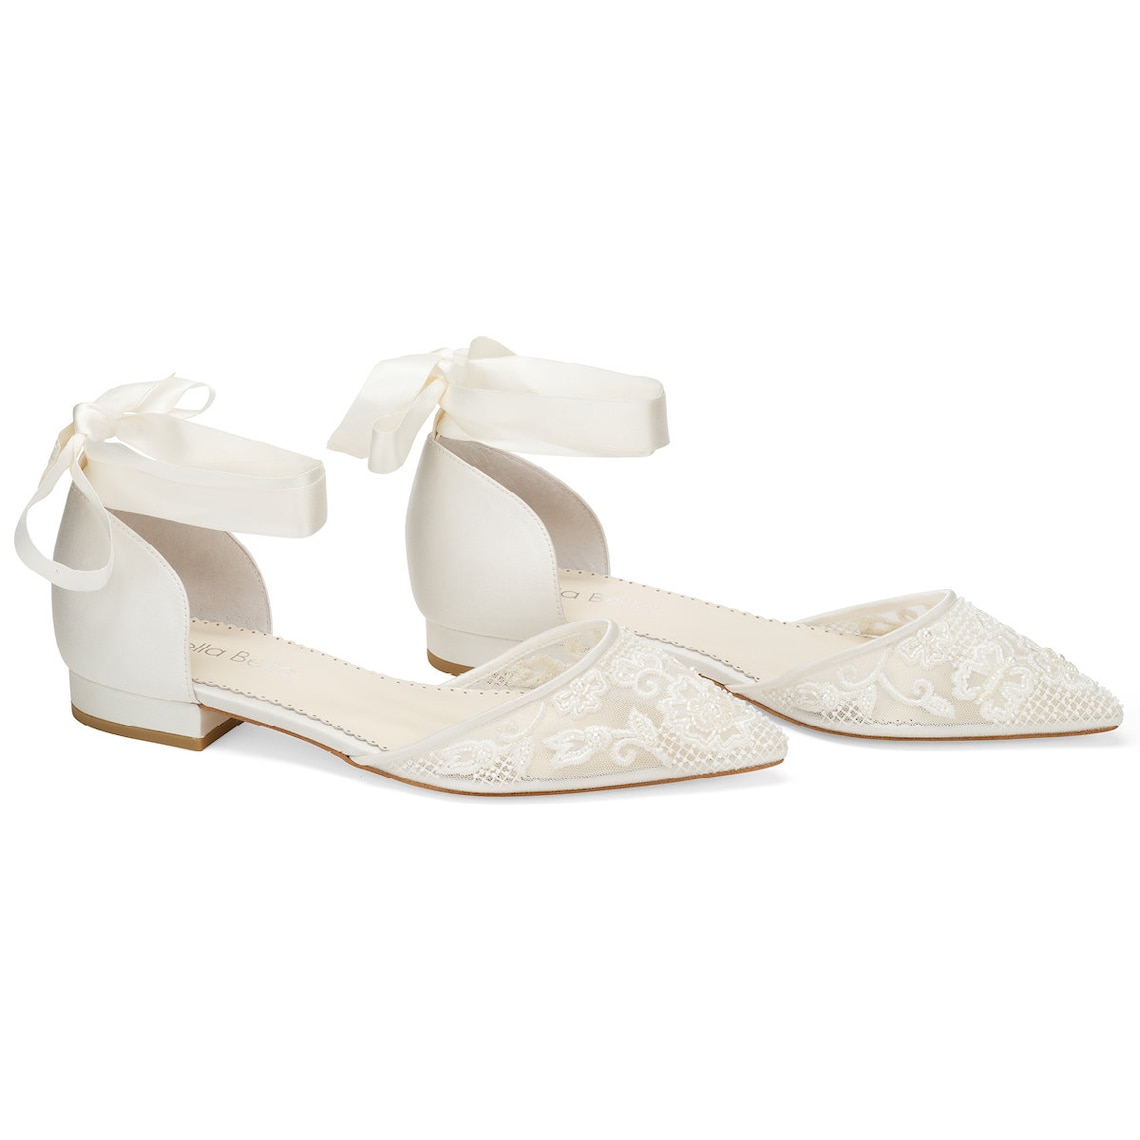 Lace and Pearl Wedding flats image 2